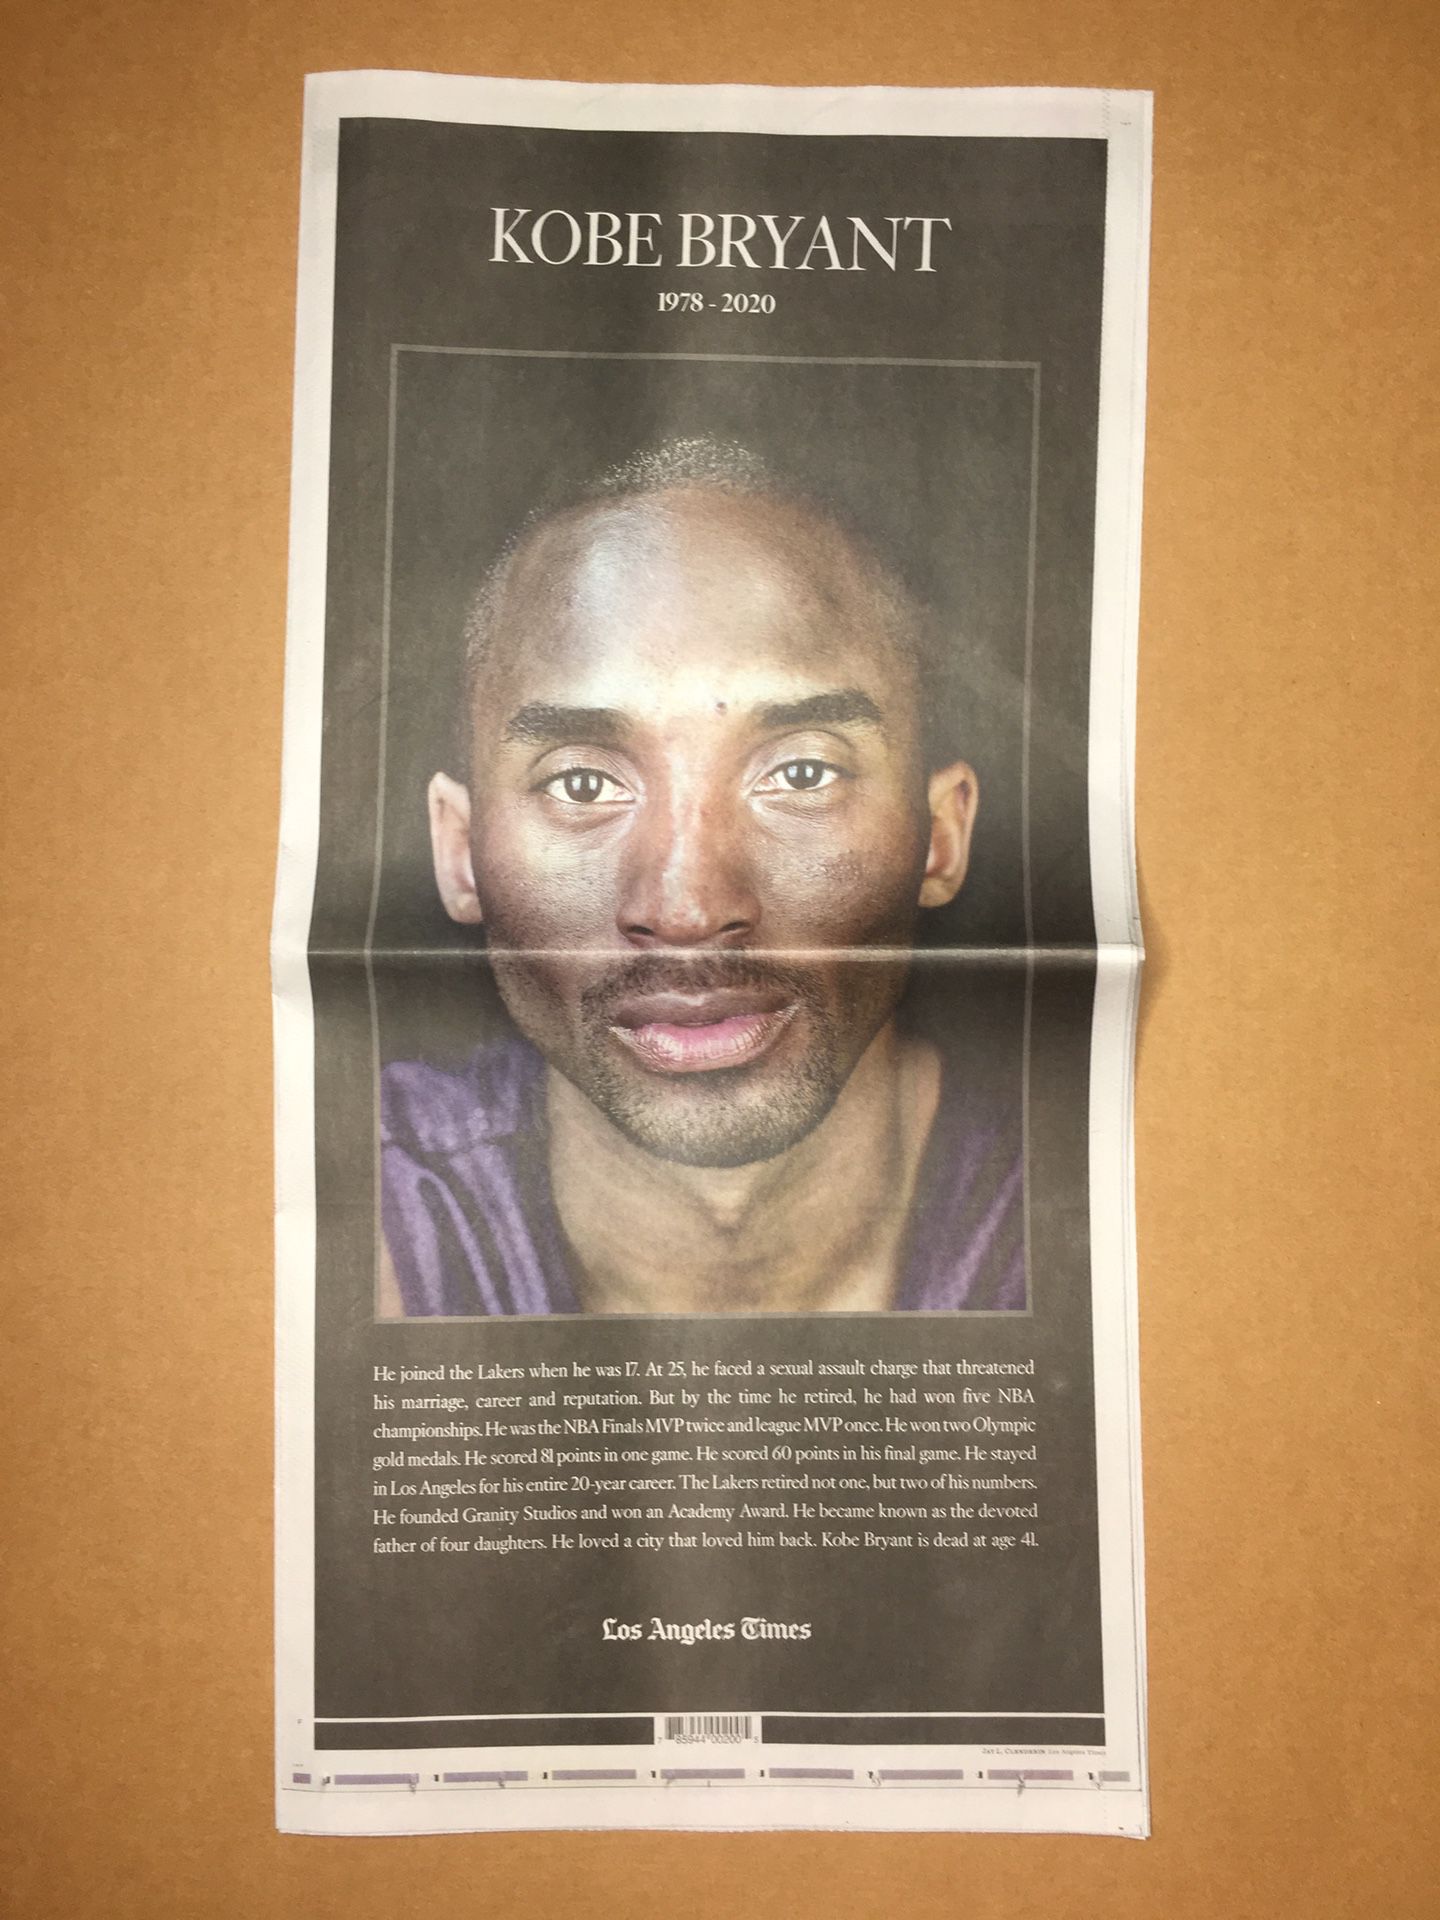 Kobe Bryant lot of newspapers for Rey